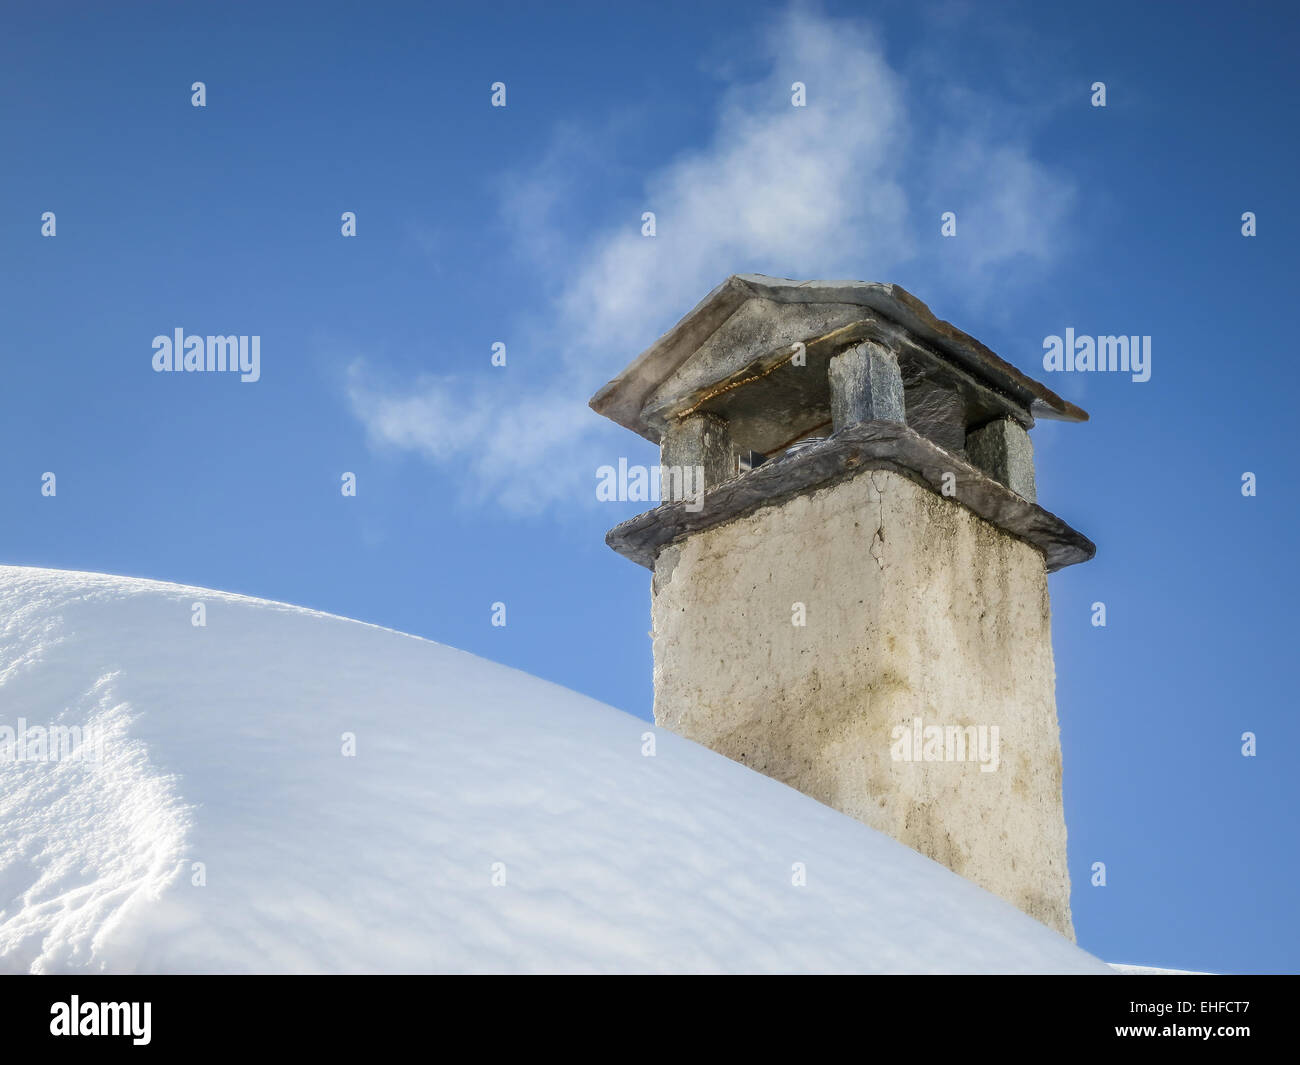 Smoke spreading from old mountain chimney on snowy roof. Vintage, old house on the mountain in winter. Warm and cold. Stock Photo